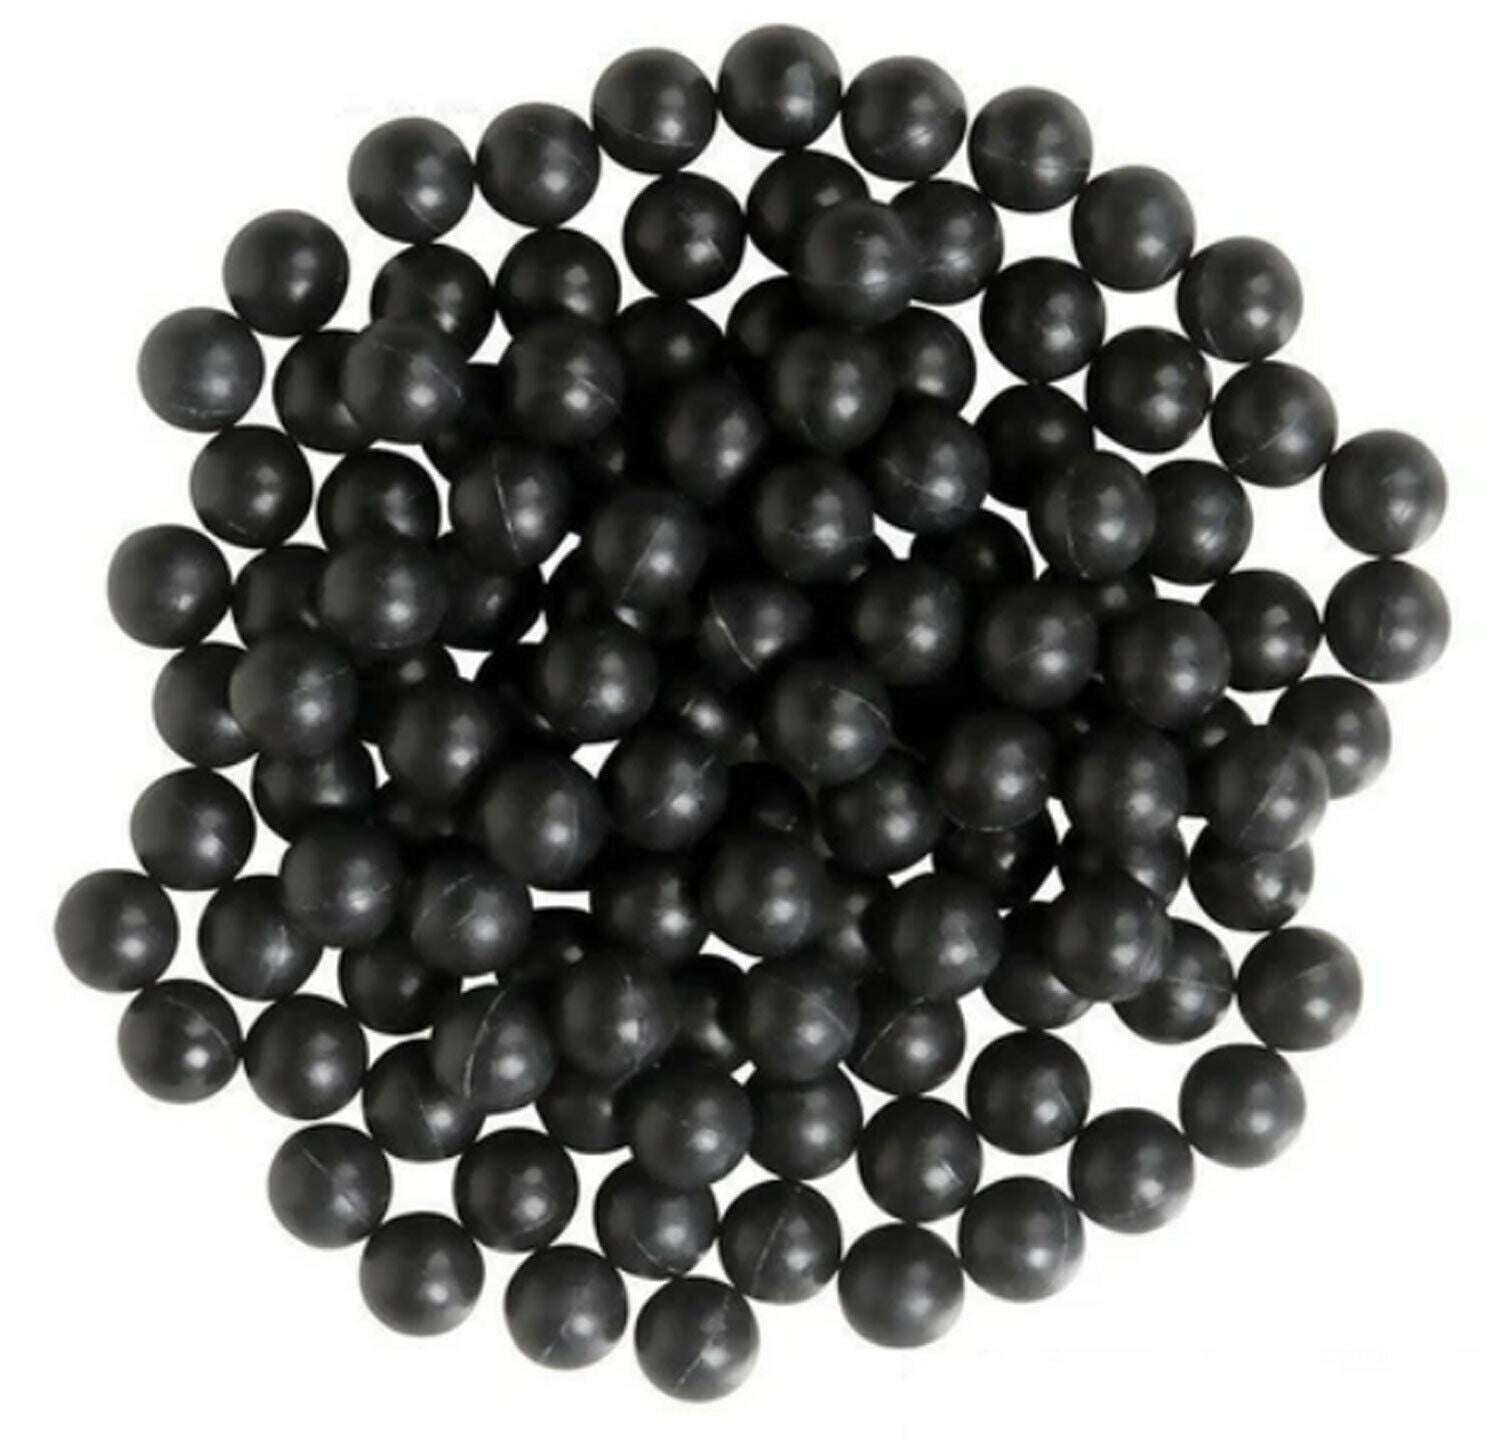 T4E .68 CAL RUBBER BALLS 100 CT - BLACK - Eminent Paintball And Airsoft